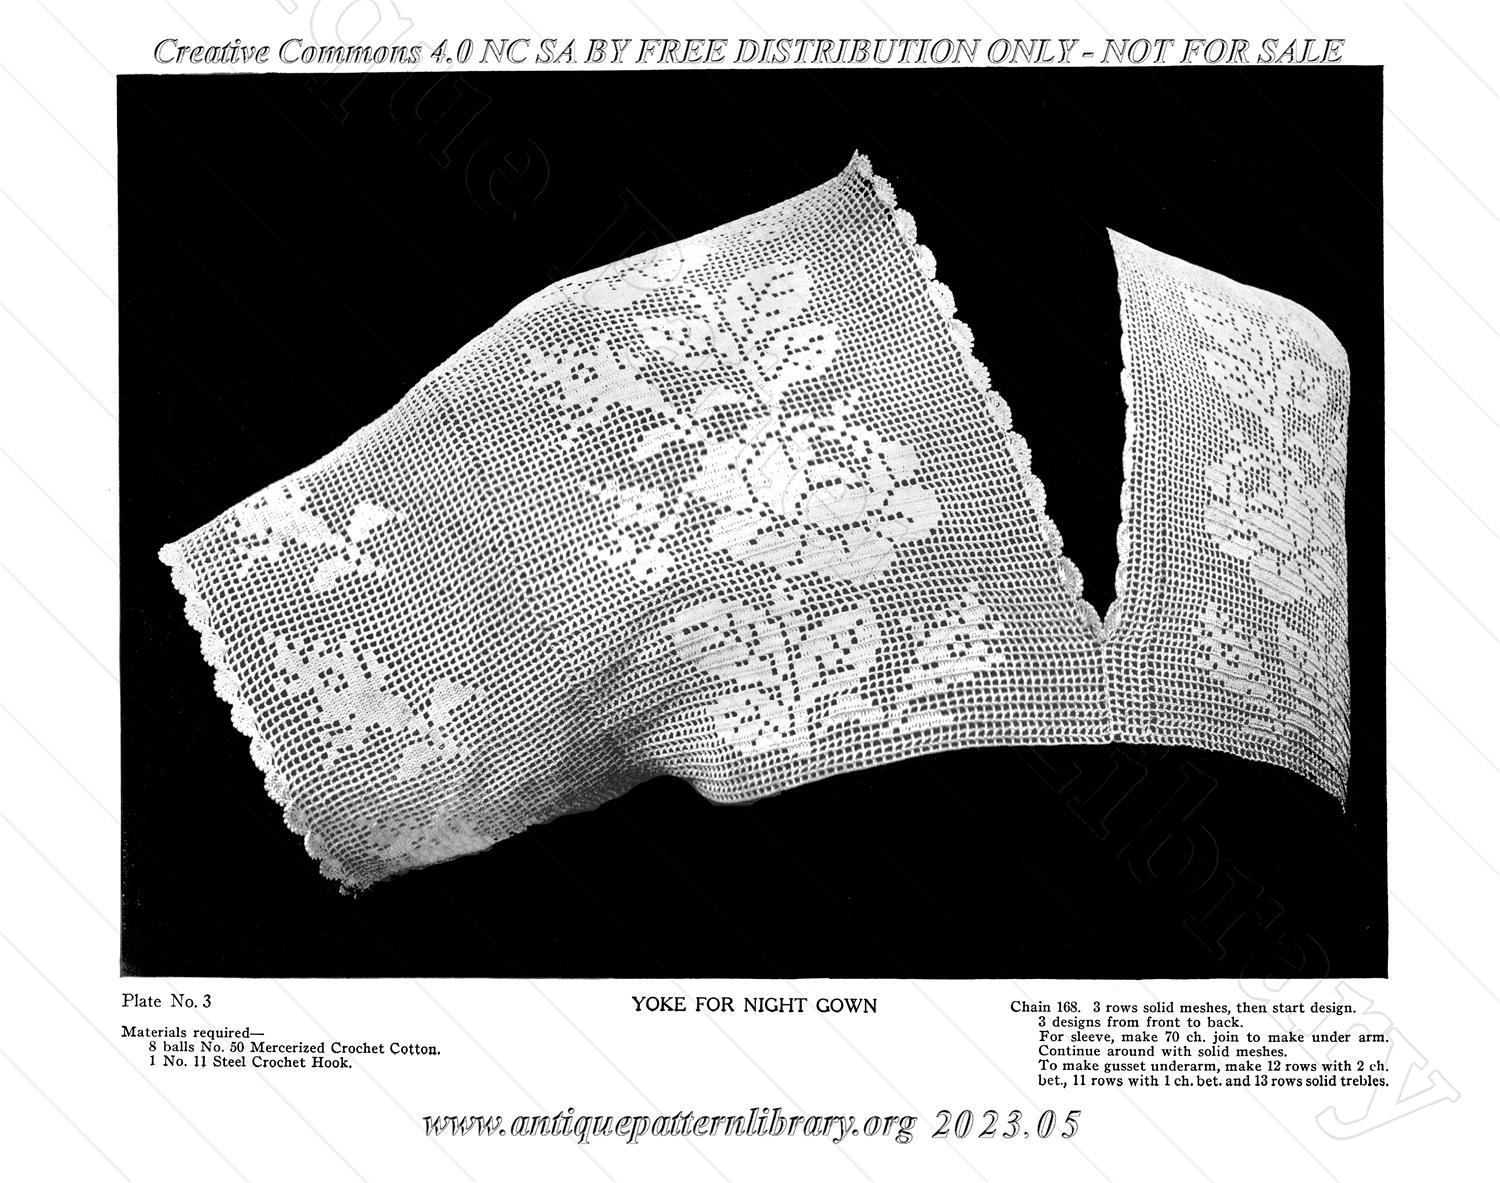 N-AP001 Crocheted Yokes for Corset Covers and Night Gowns